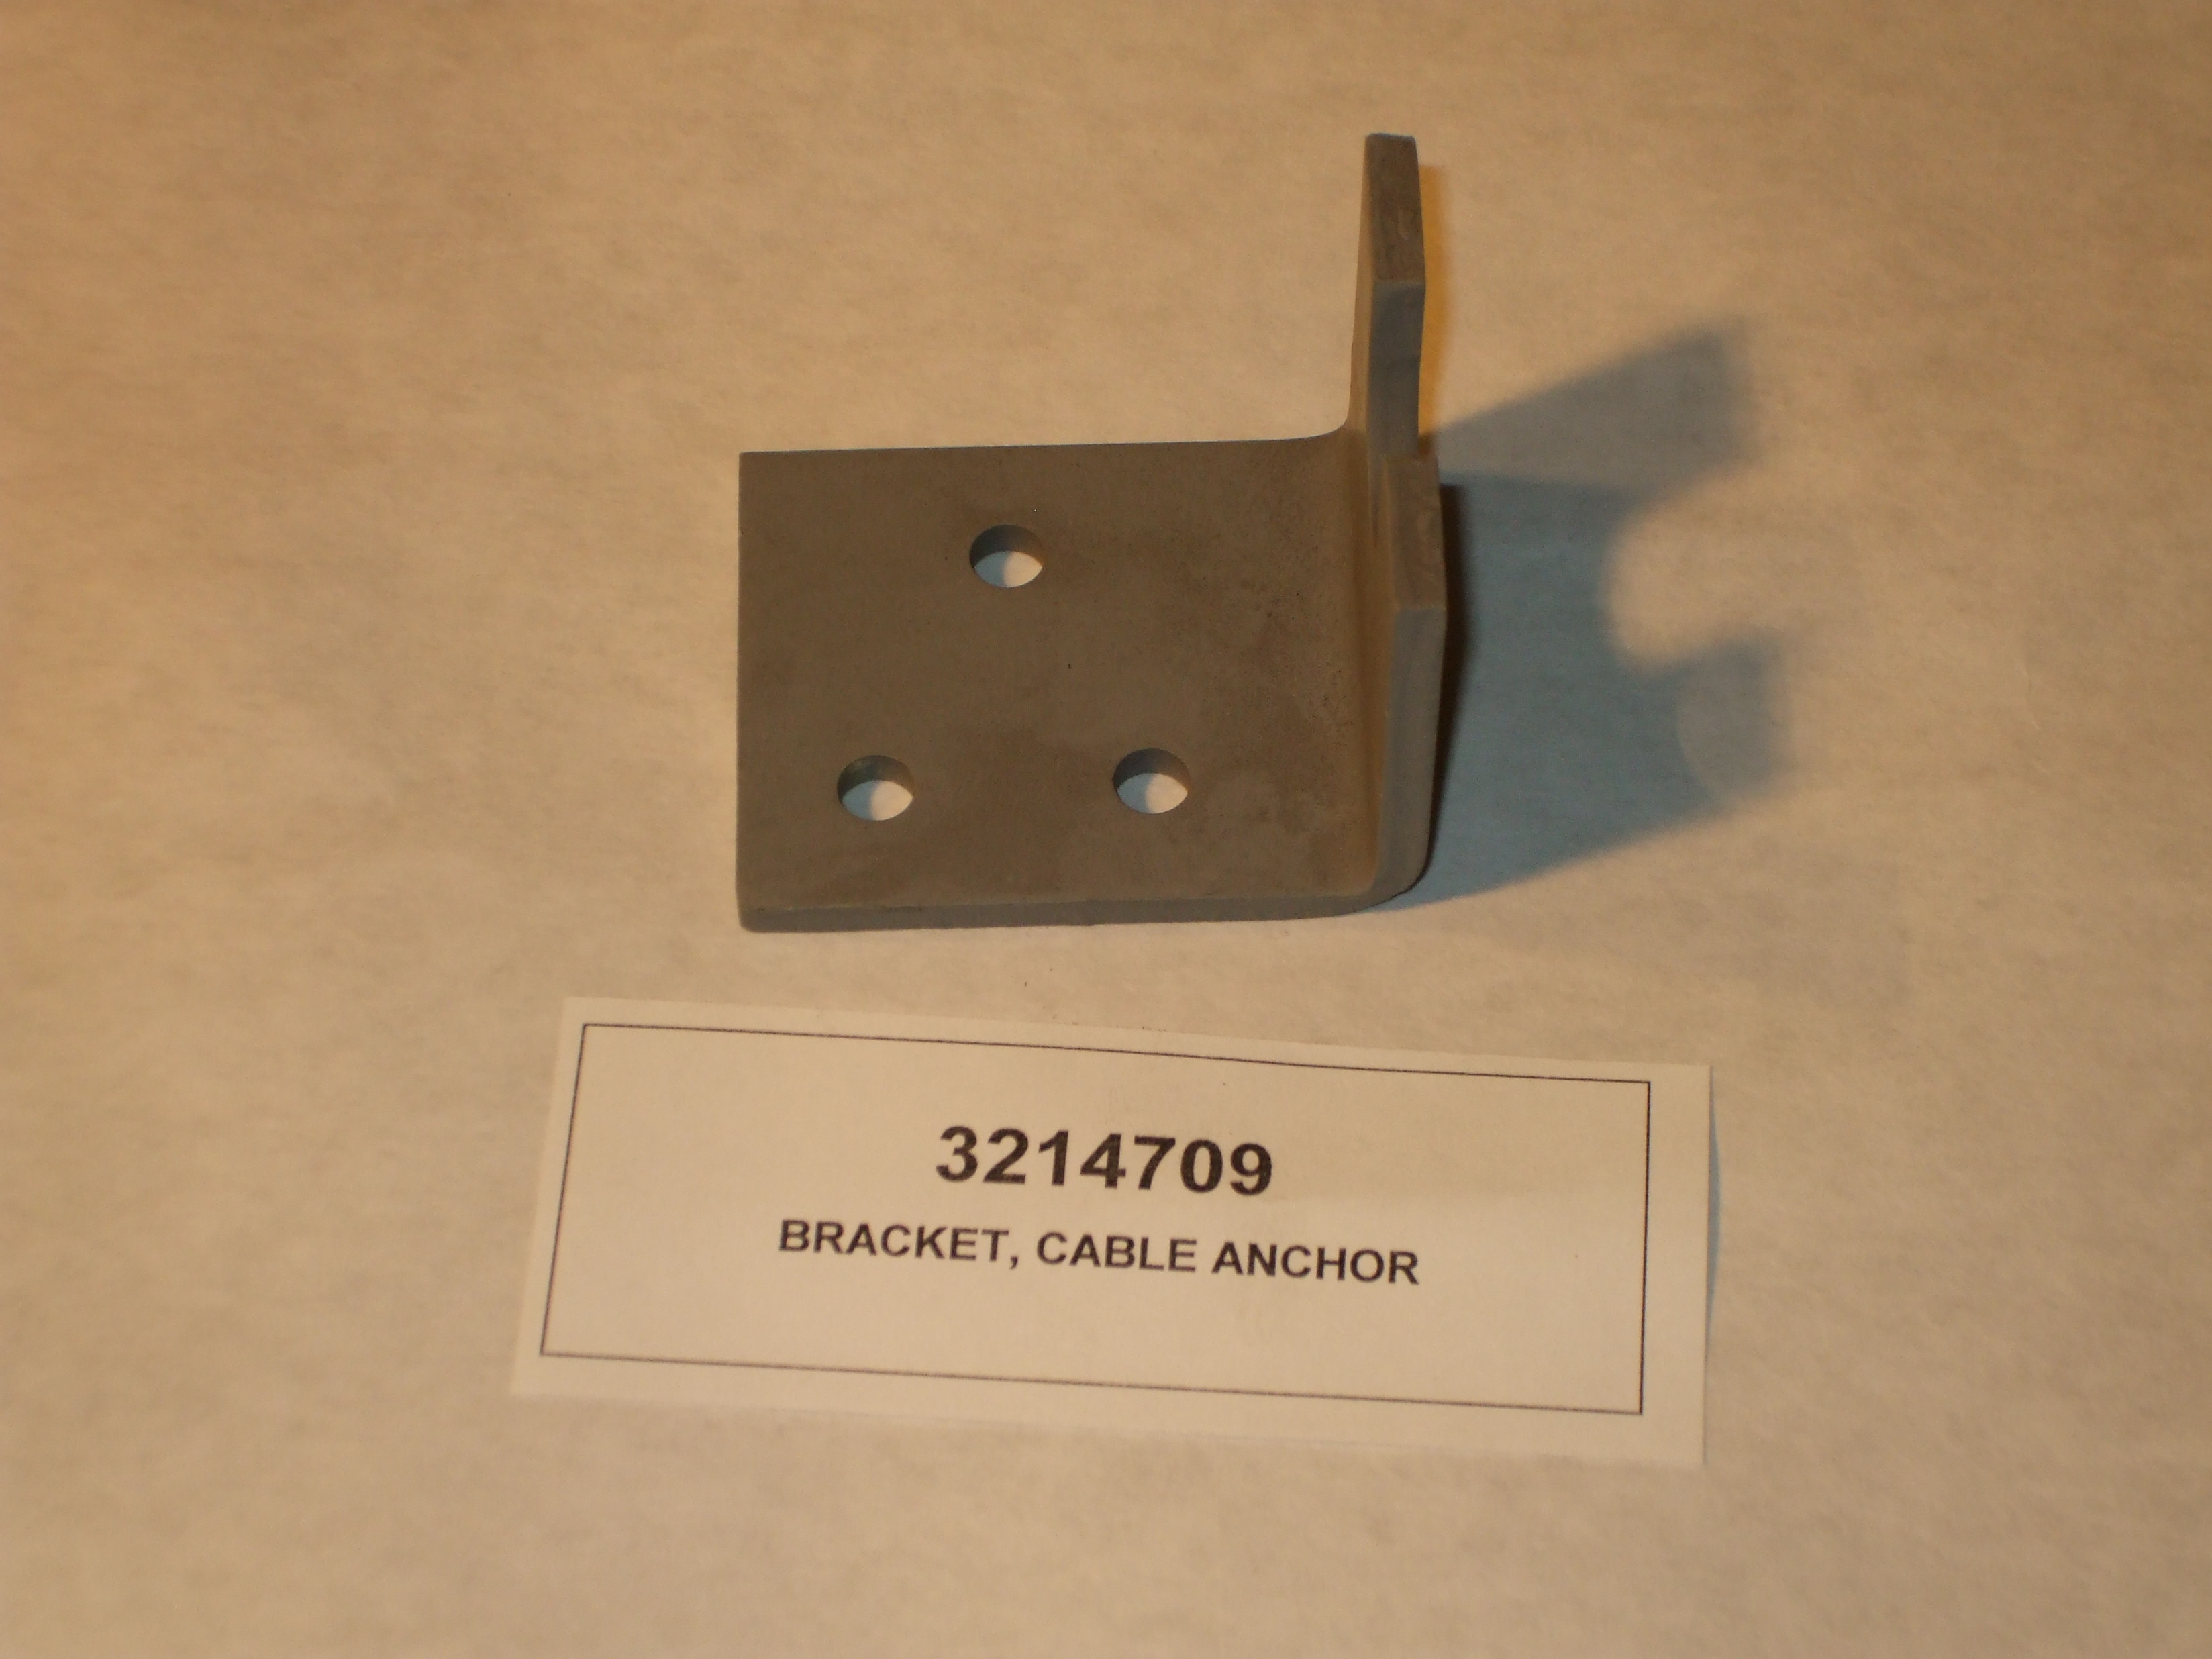 BRACKET, CABLE ANCHOR